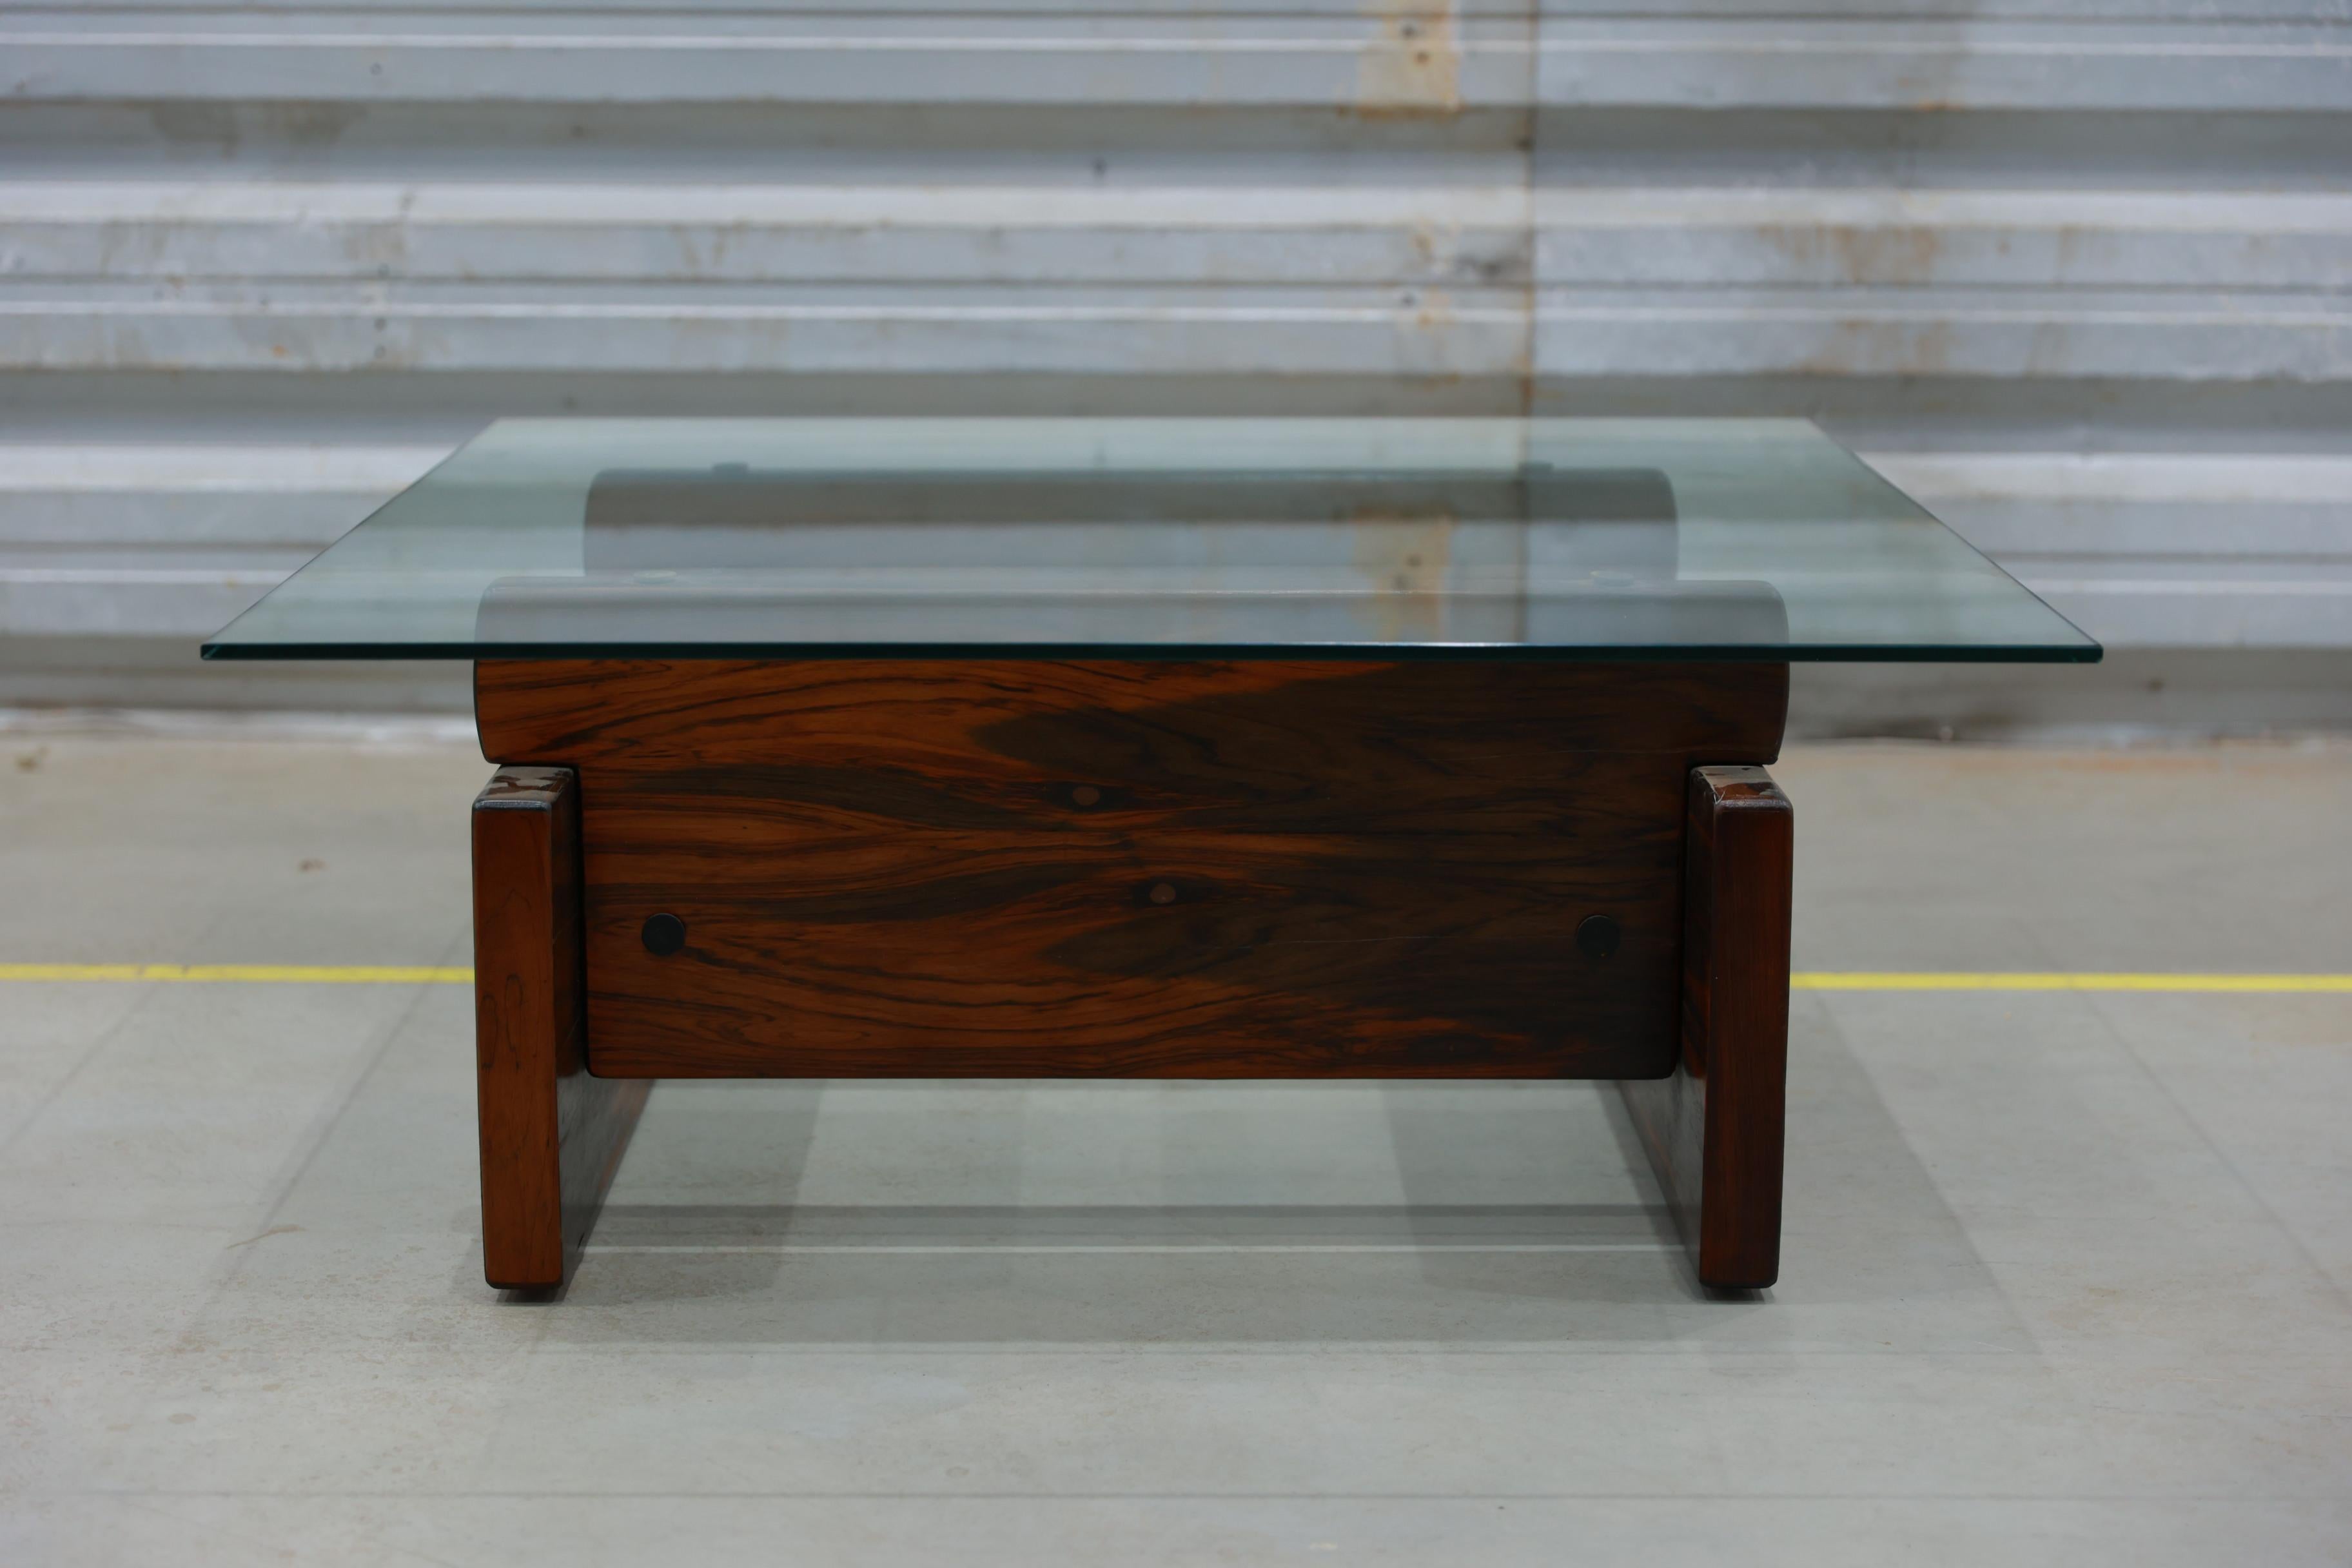 Available today, this Mid-century Modern Coffee Table in Hardwood and Glass, by Sergio Rodrigues, is THE find of the year!

The square shaped base is made in solid Brazilian rosewood (Jacaranda) with a rosewood veneer, displaying a beautiful gran